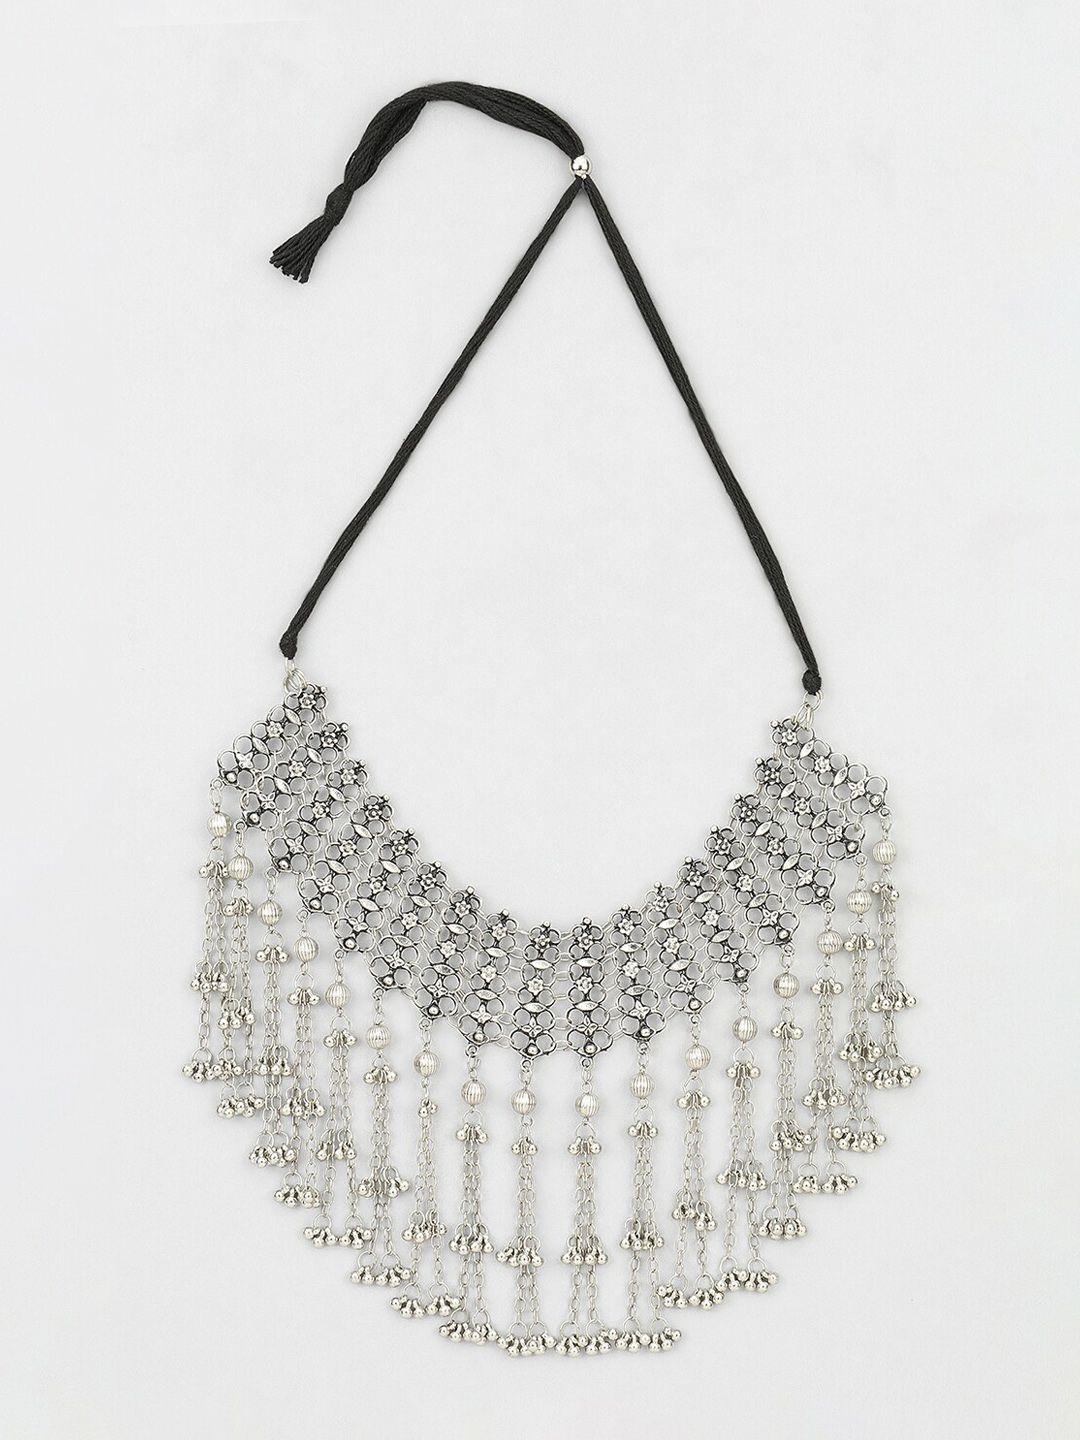 samridhi dc silver-toned silver-plated necklace